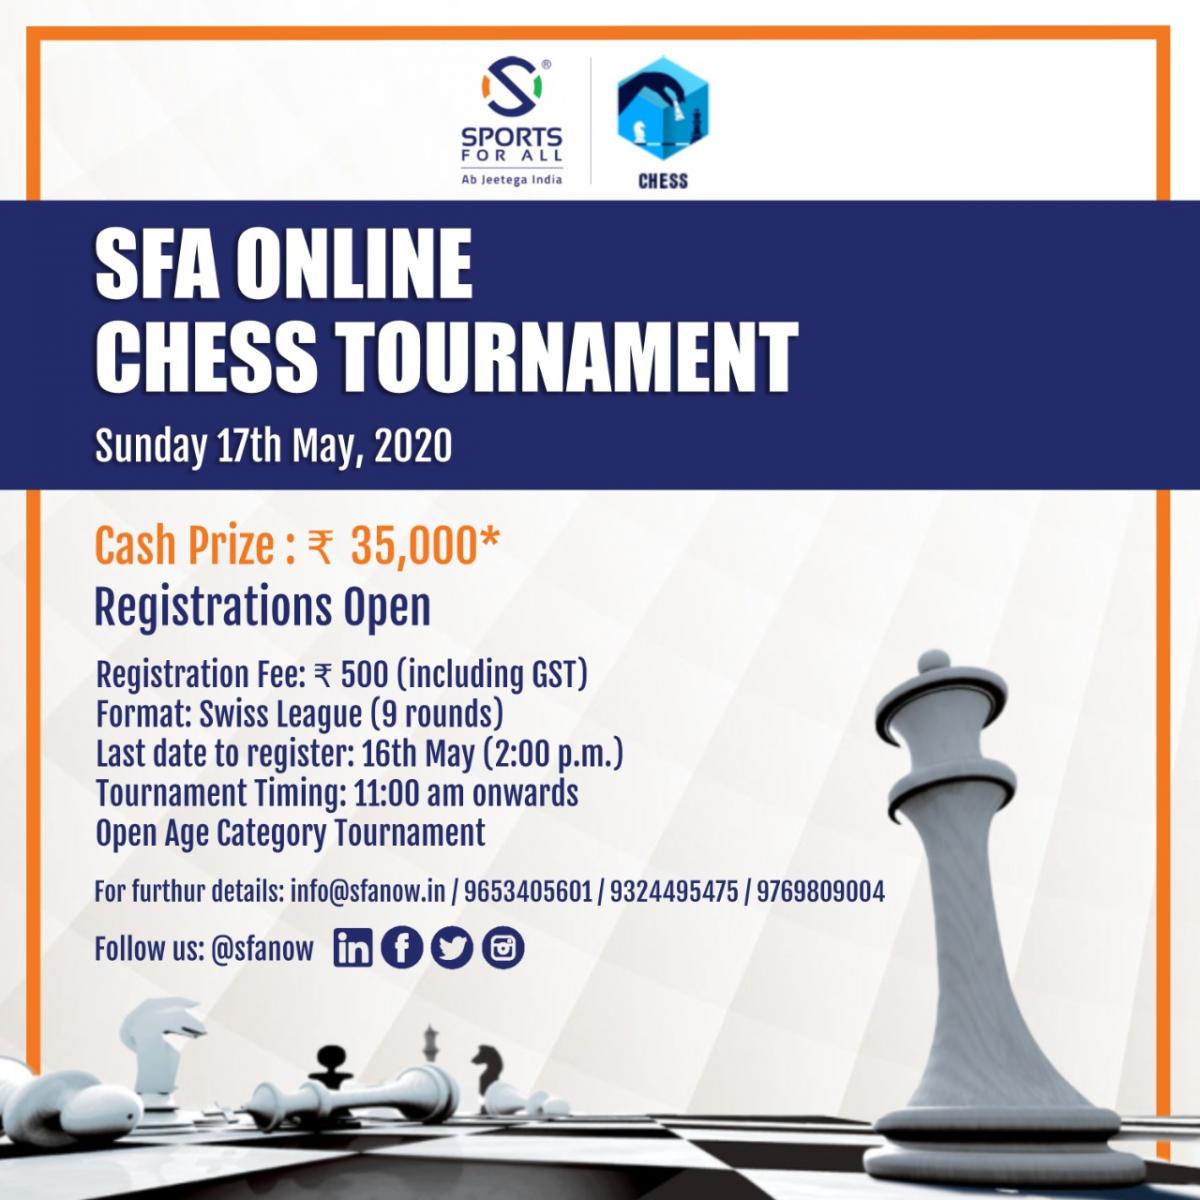 Online chess tournament with prizes